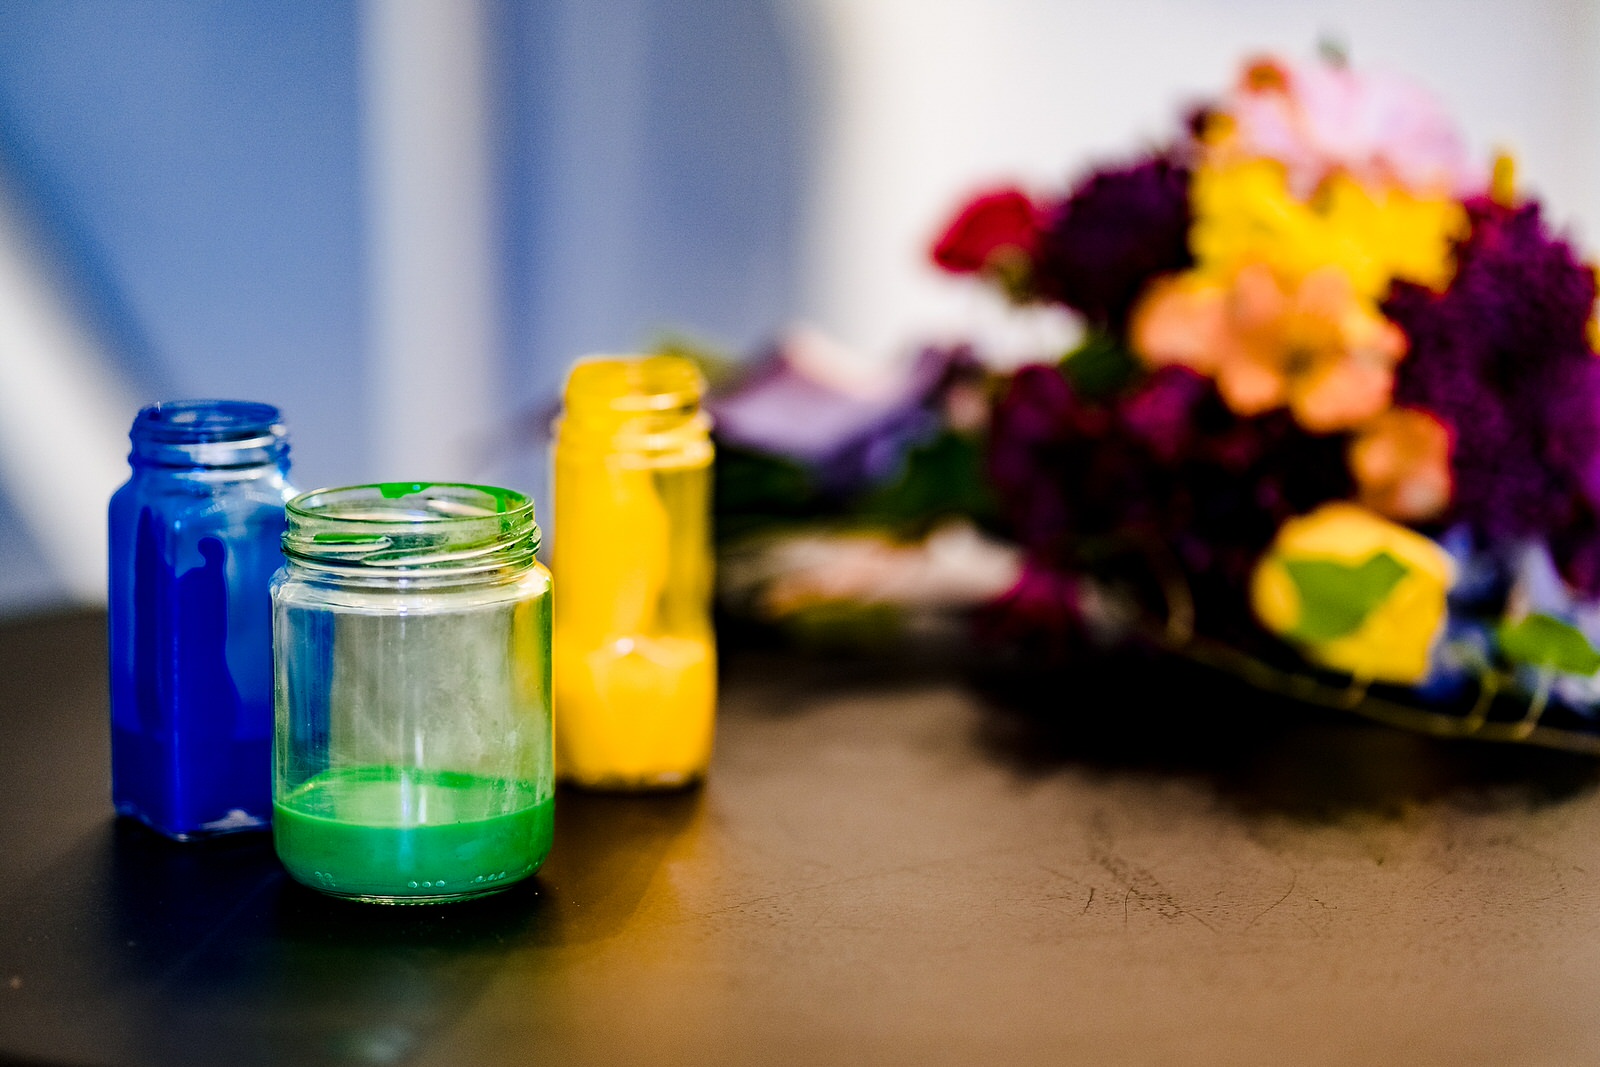 Paint jars await a custom paint pour unity ceremony at this colorful wedding inspiration styled shoot